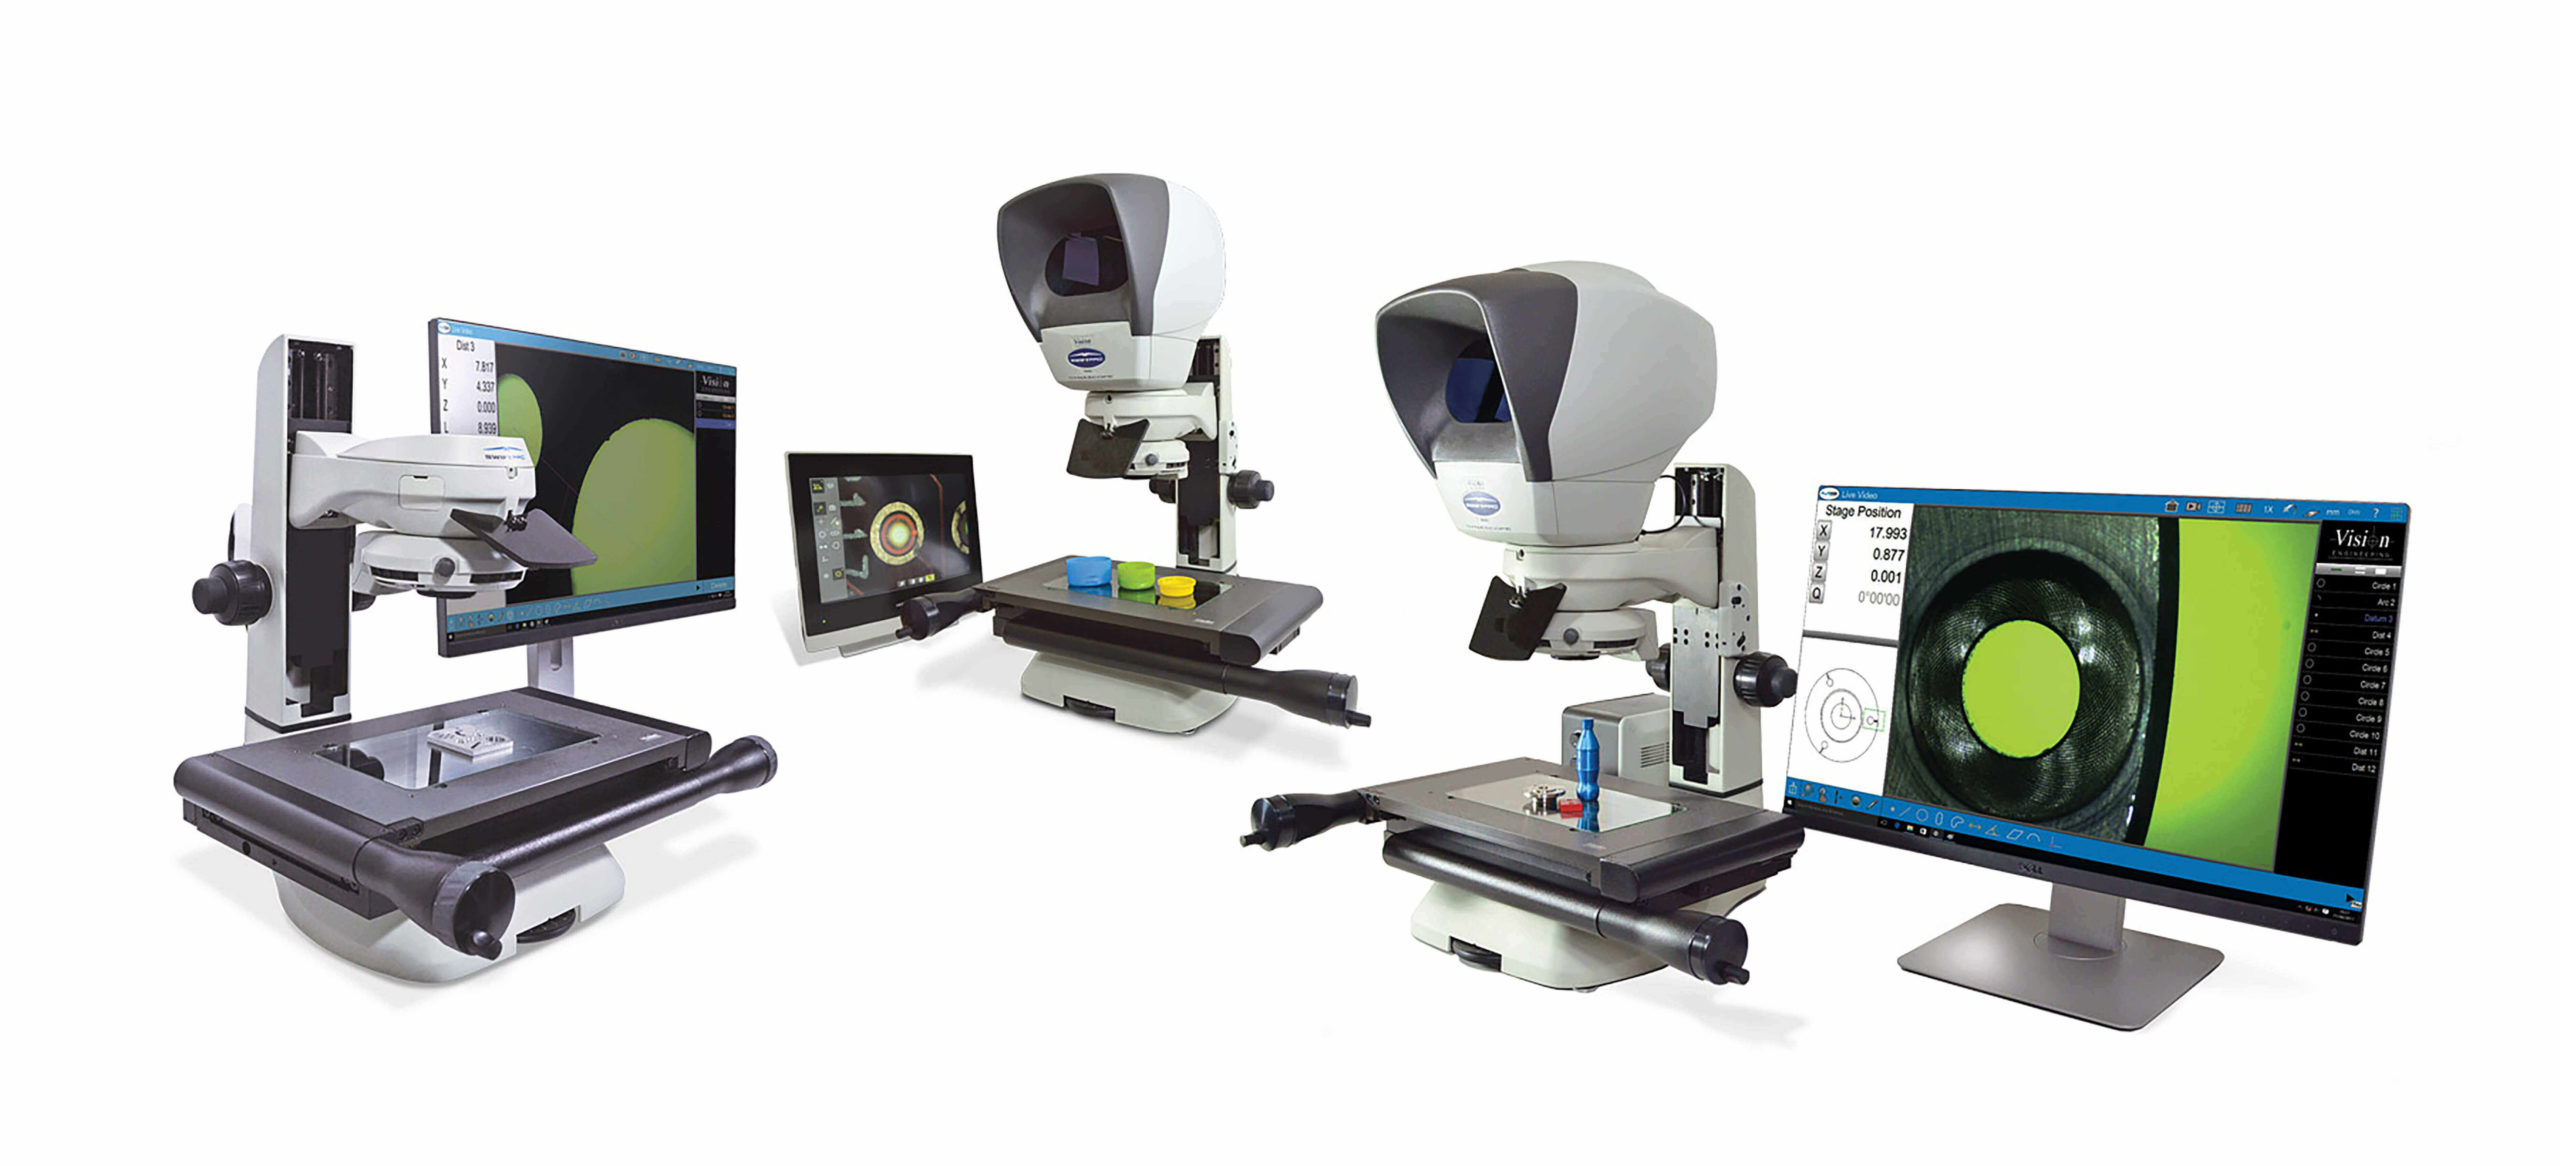 Swift PRO family of optical and video measuring systems